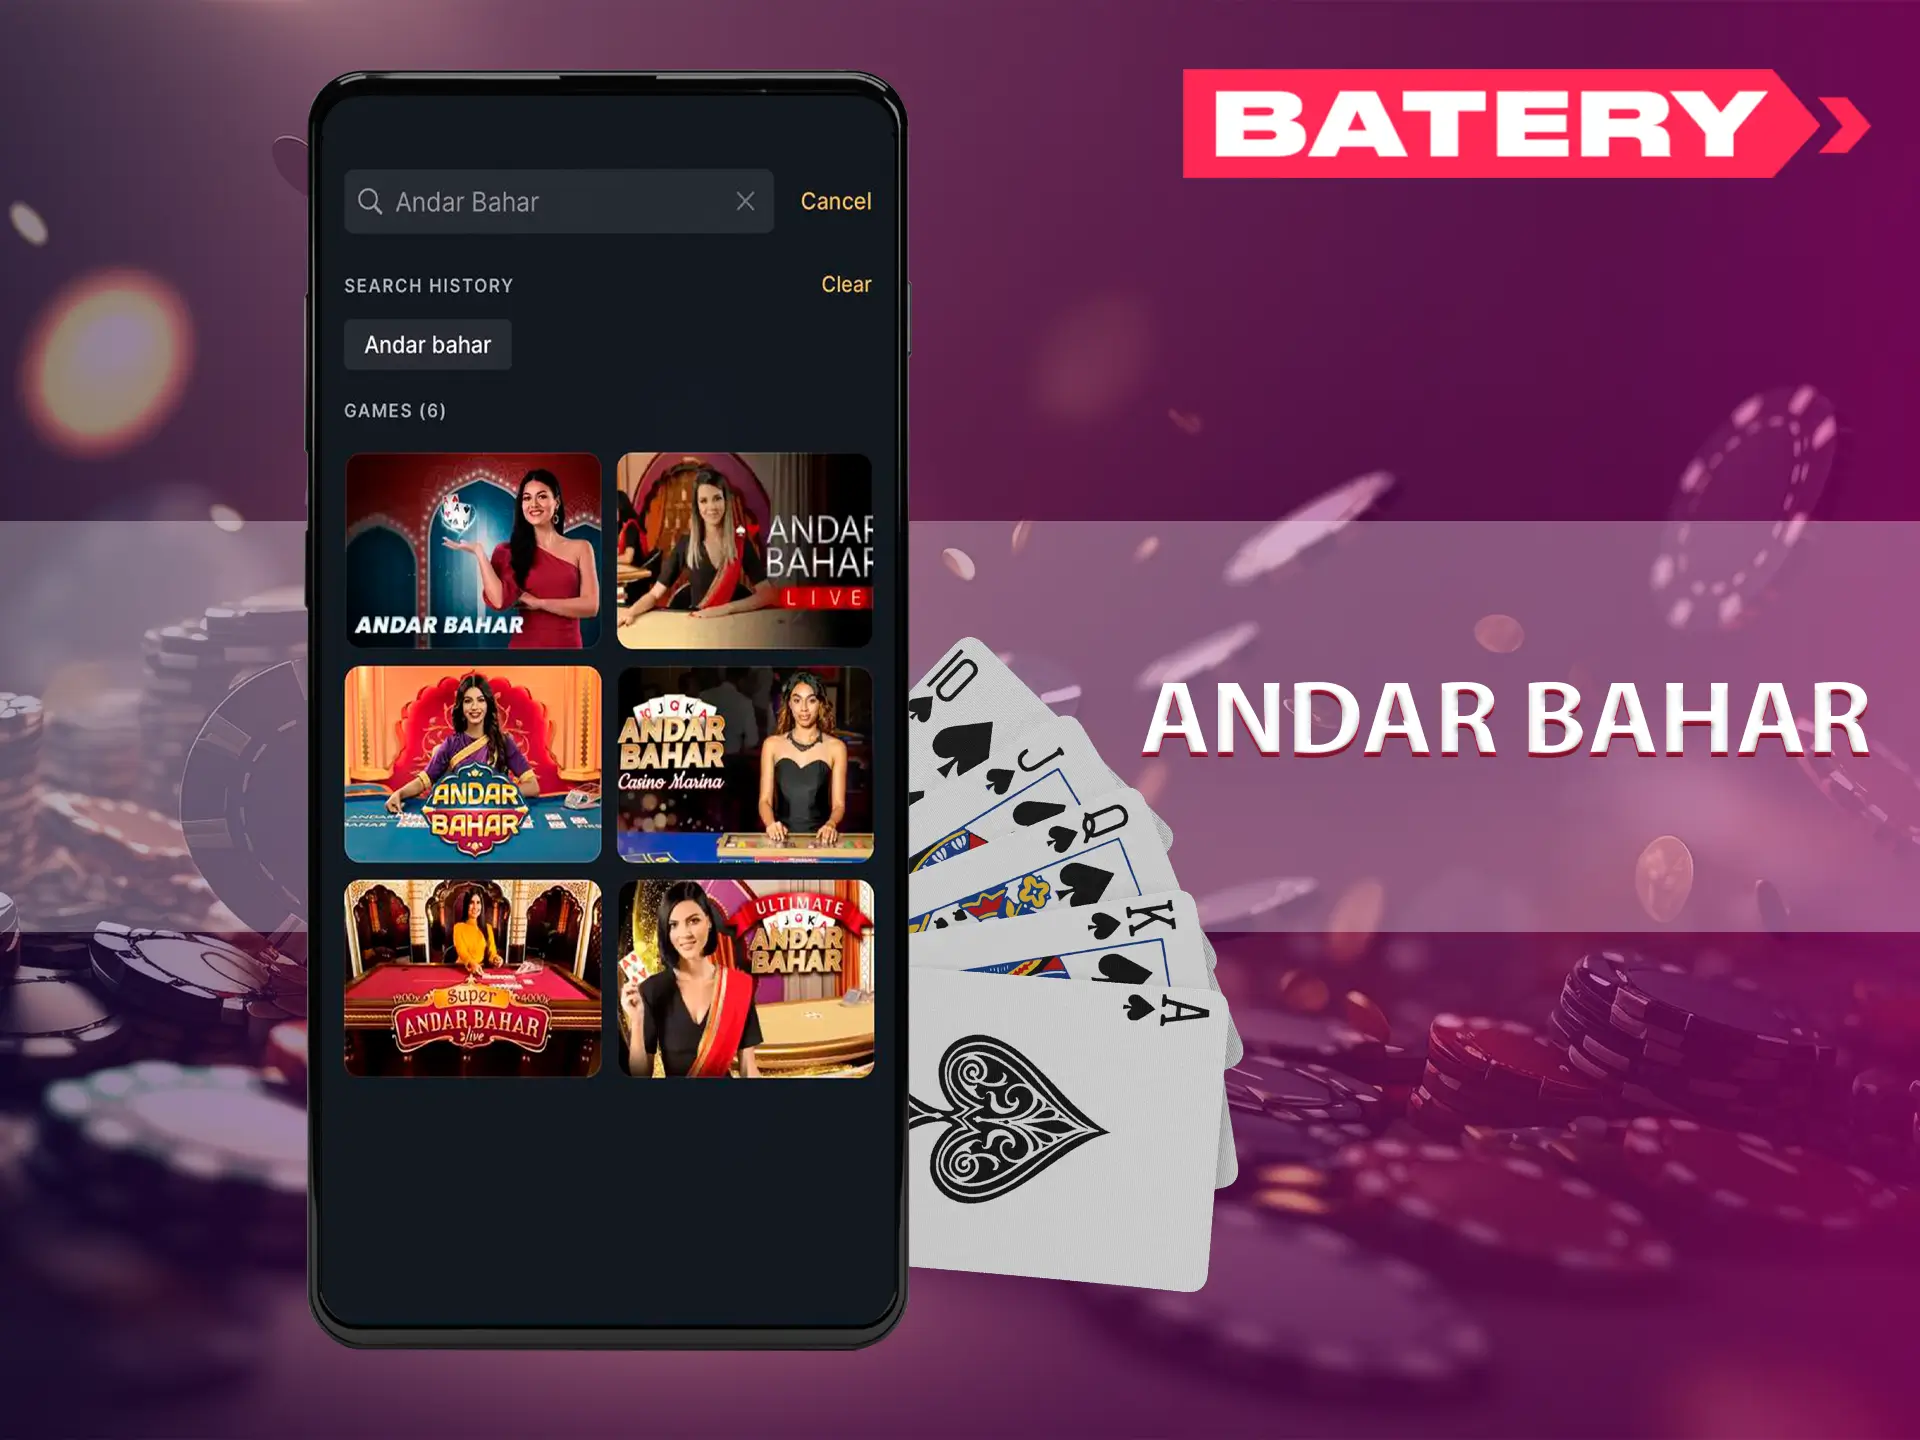 Try the popular card game Andar Bahar at Batery Casino.